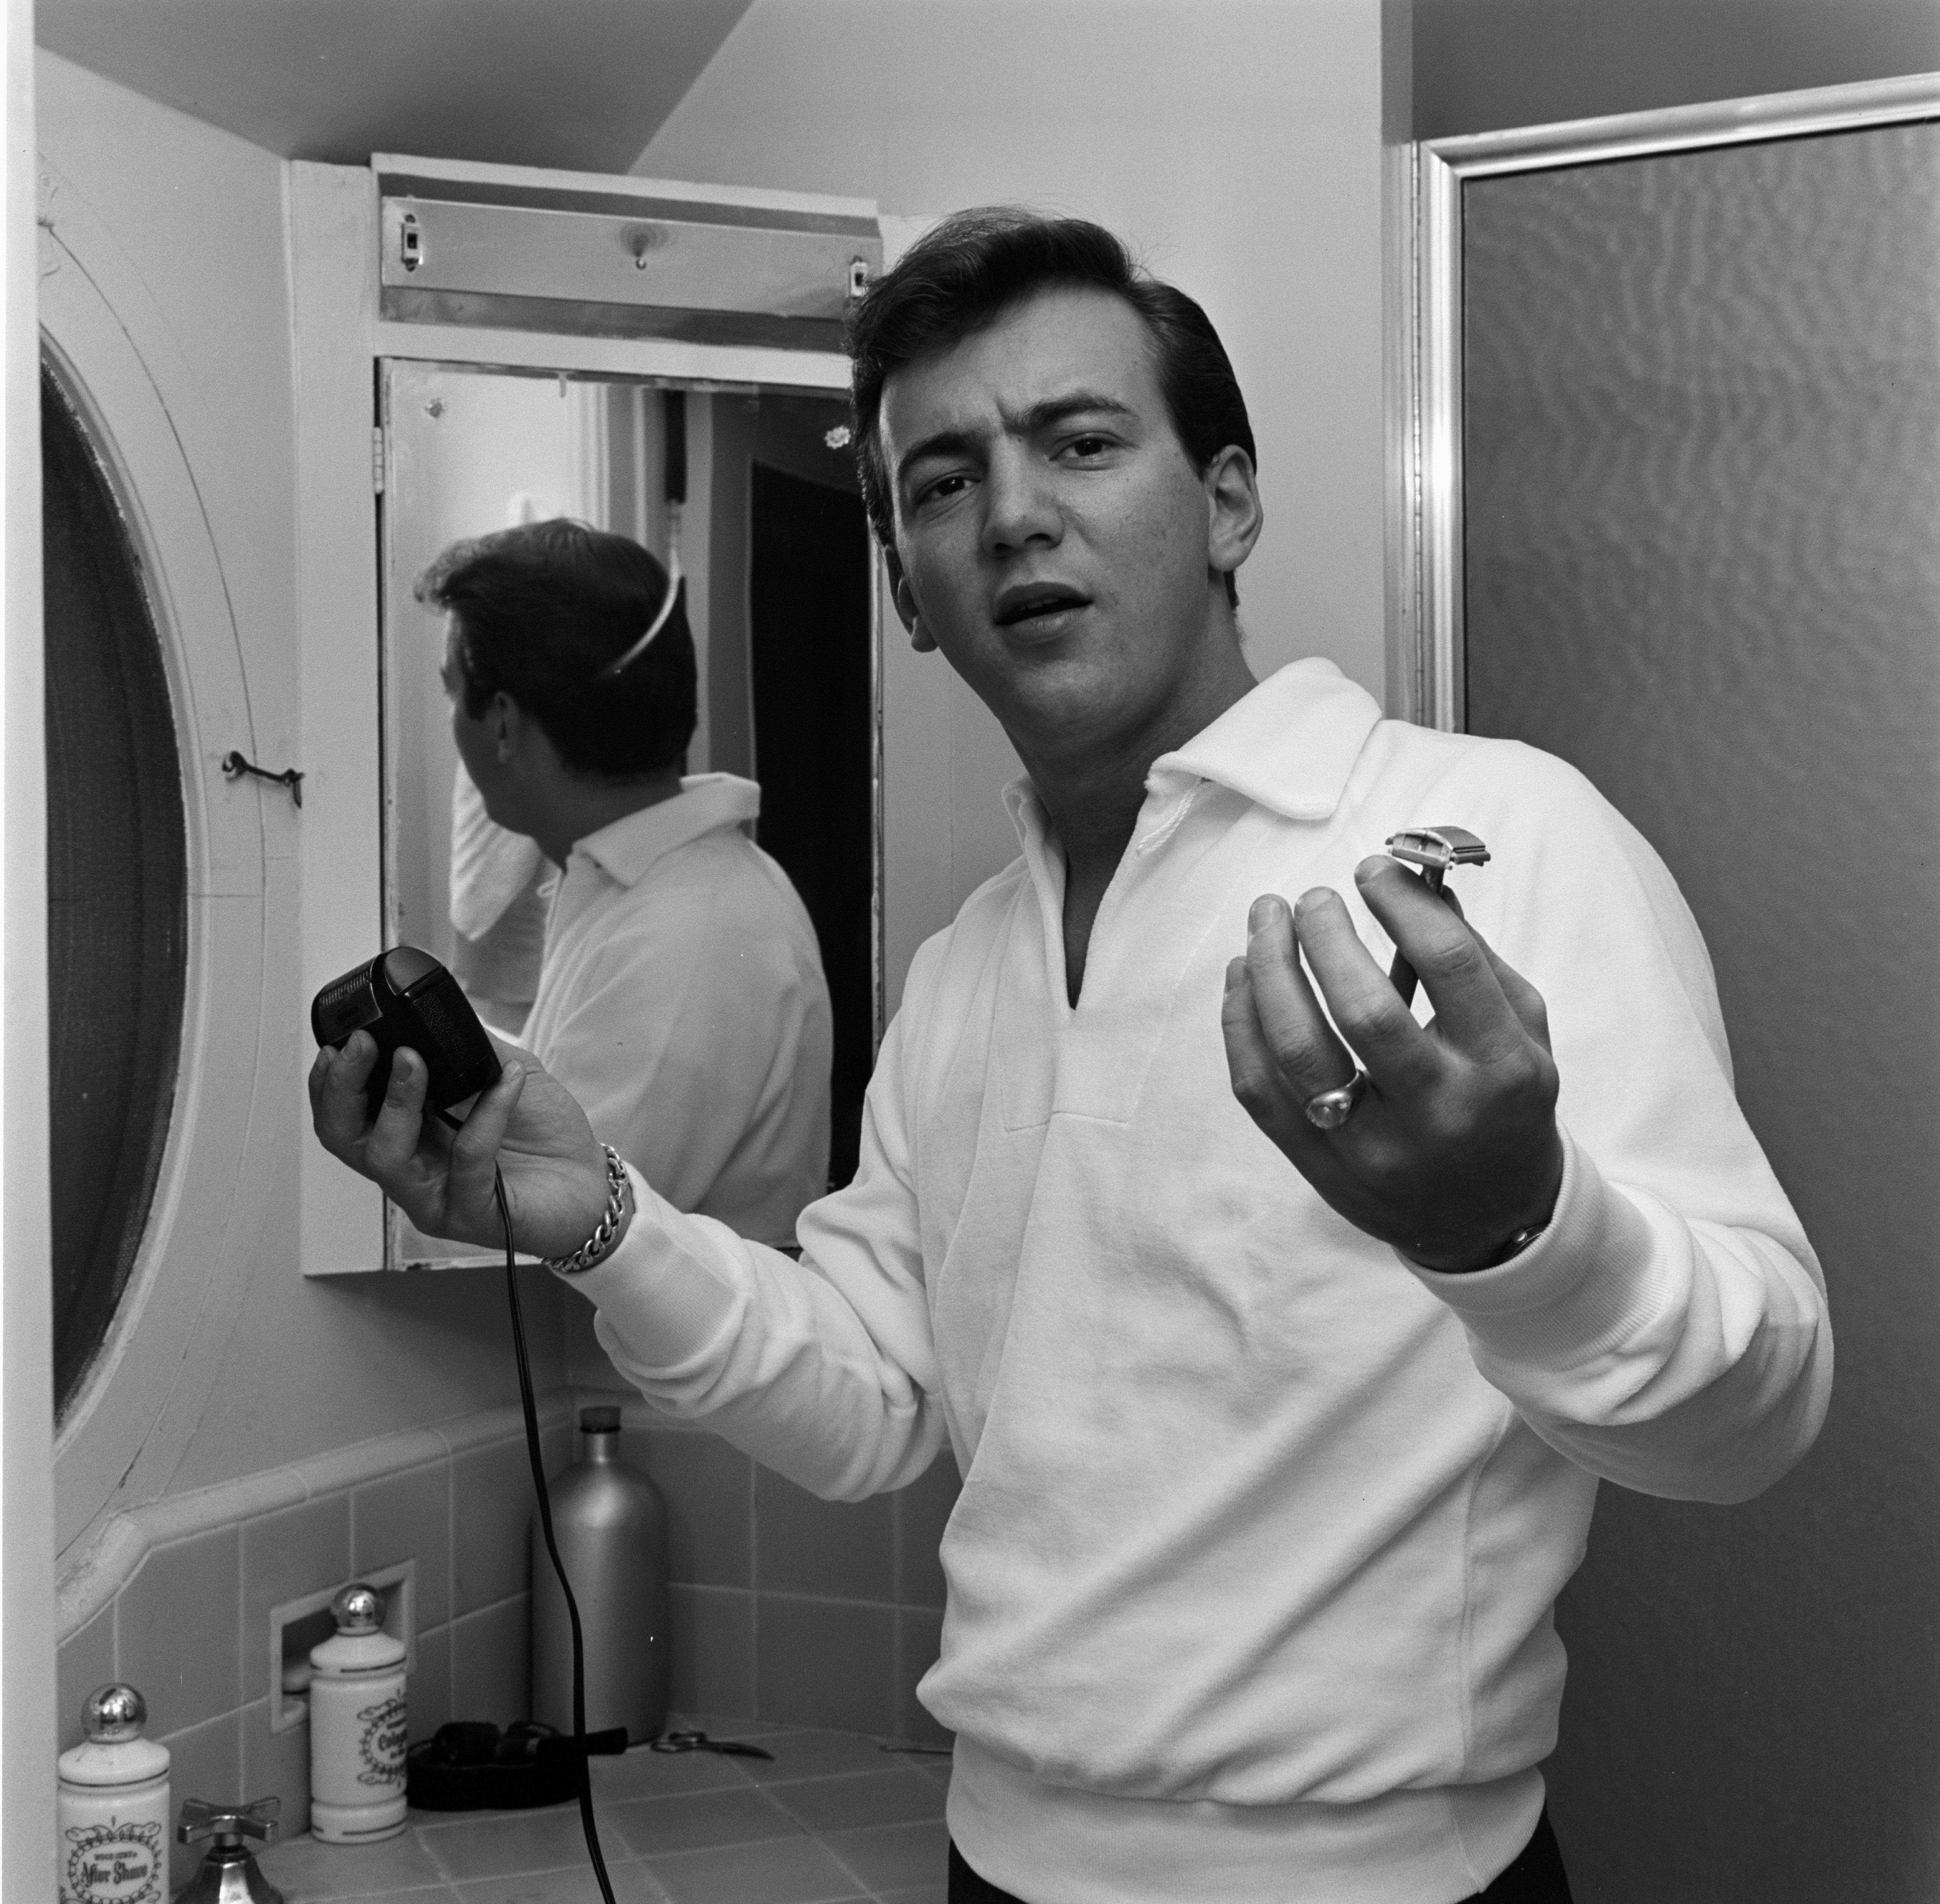 Bobby Darin preparing for work | Source: Getty Images